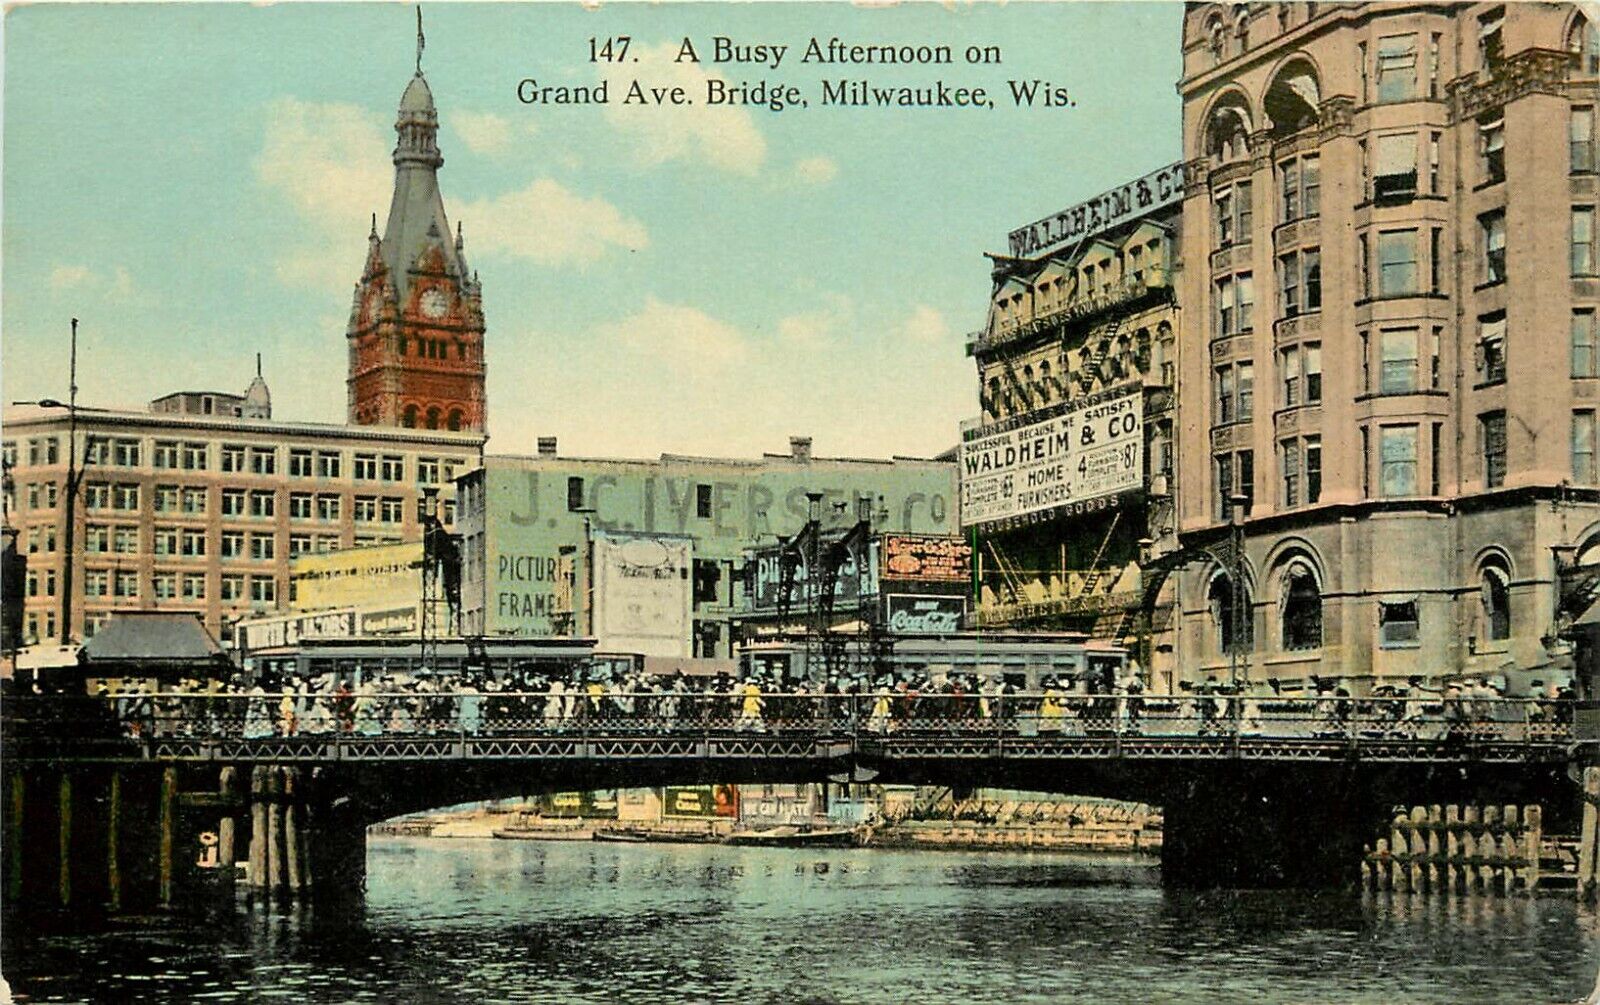 c1910 Postcard; Busy Afternoon on Grand Ave. Bridge, Milwaukee WI